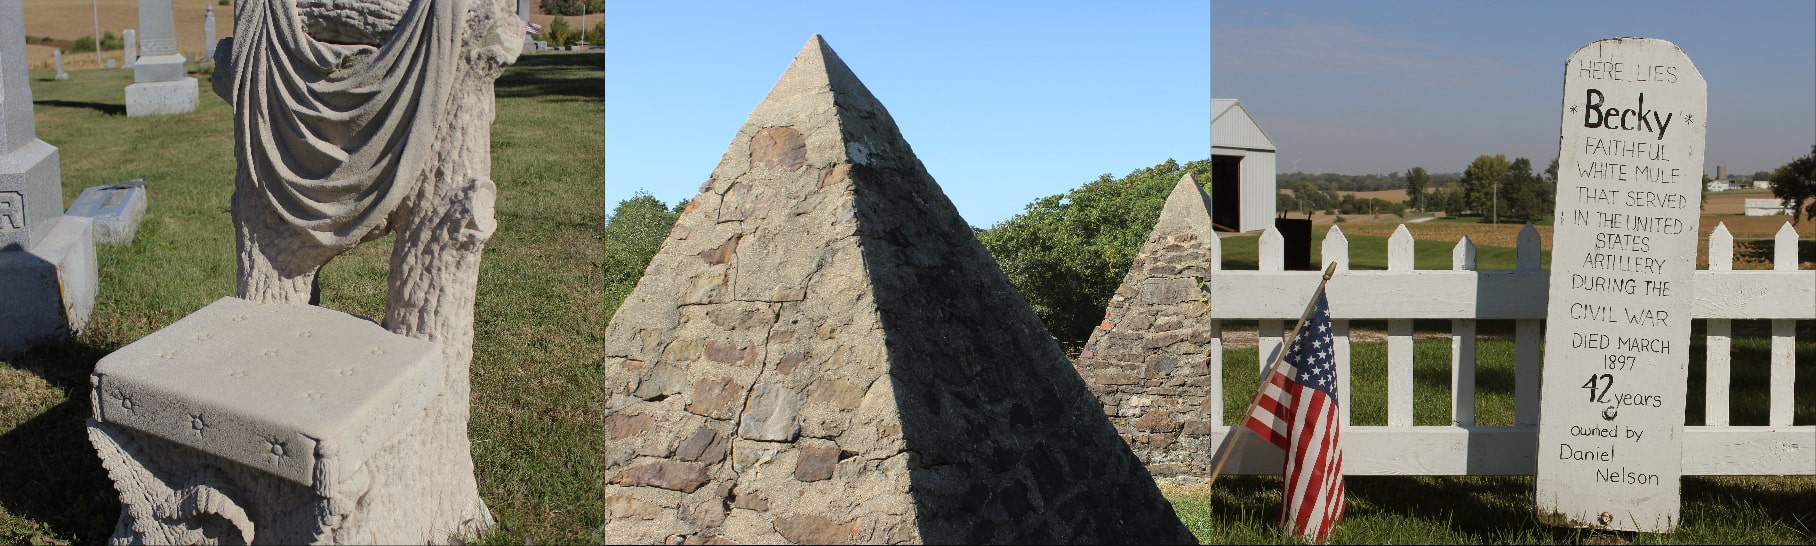 Collection of gravestones including a devil's chair stone, pyramid mausoleum, and donkey burial site